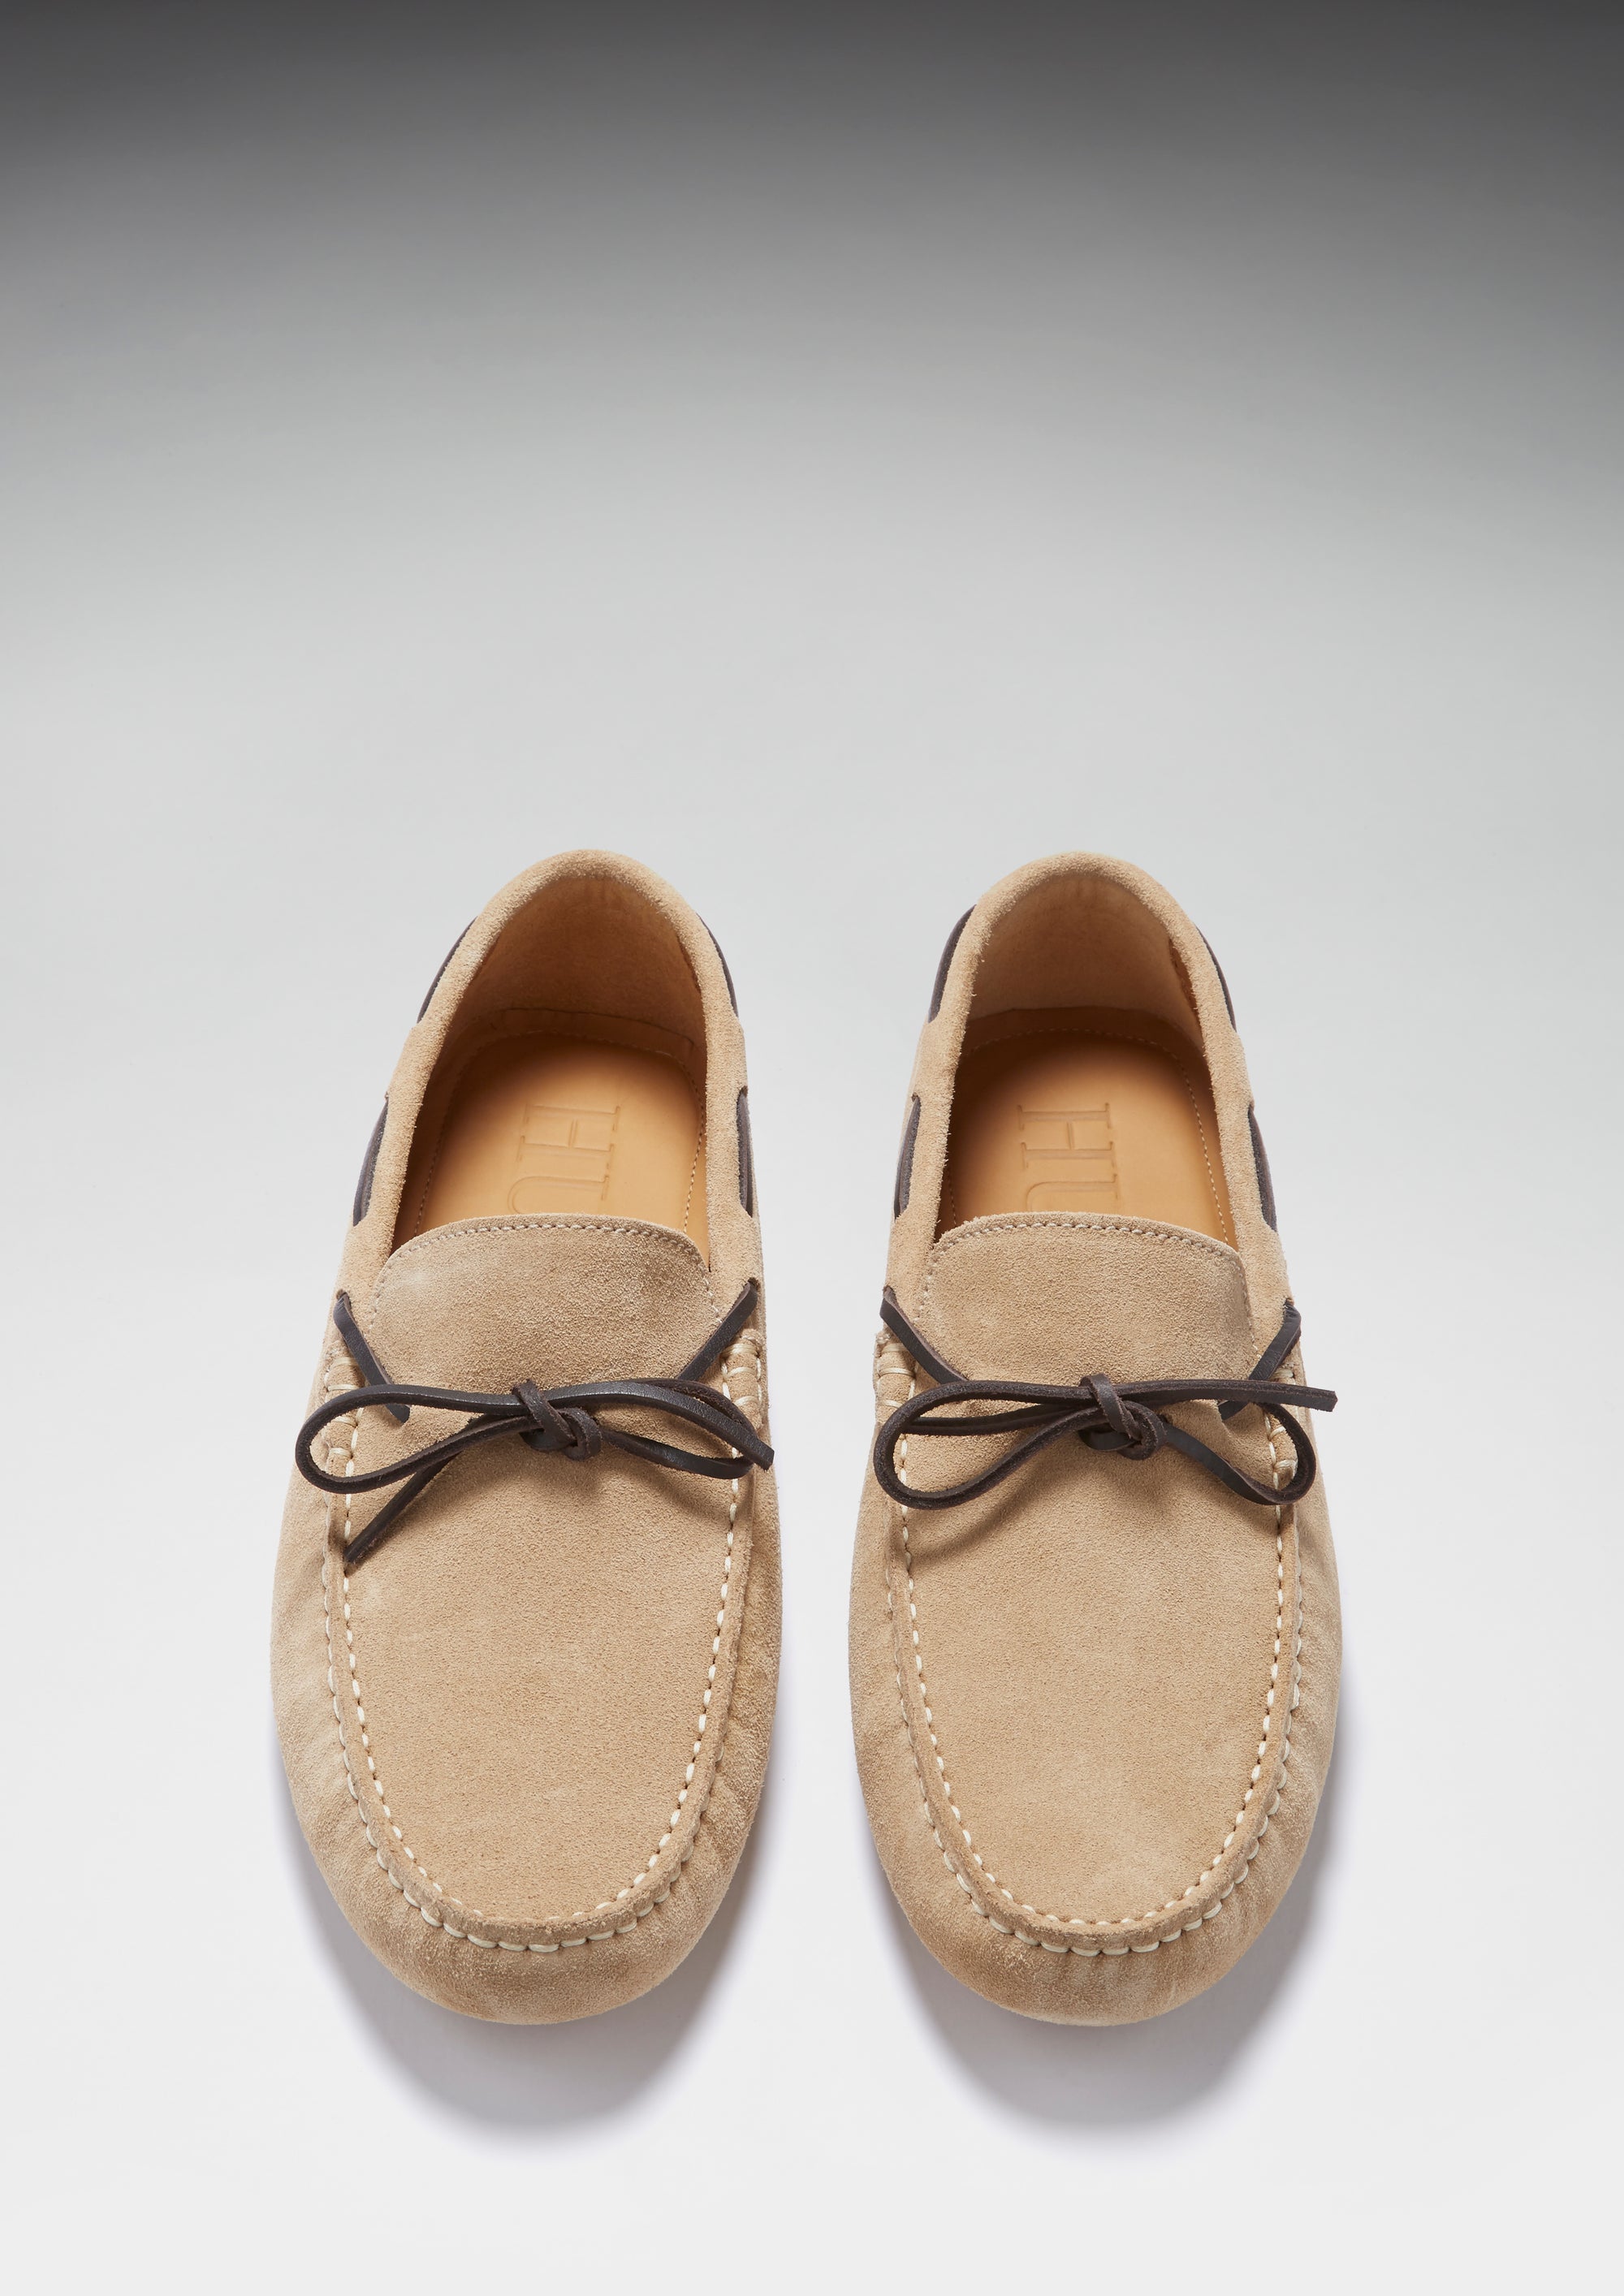 Laced Driving Loafers, taupe suede